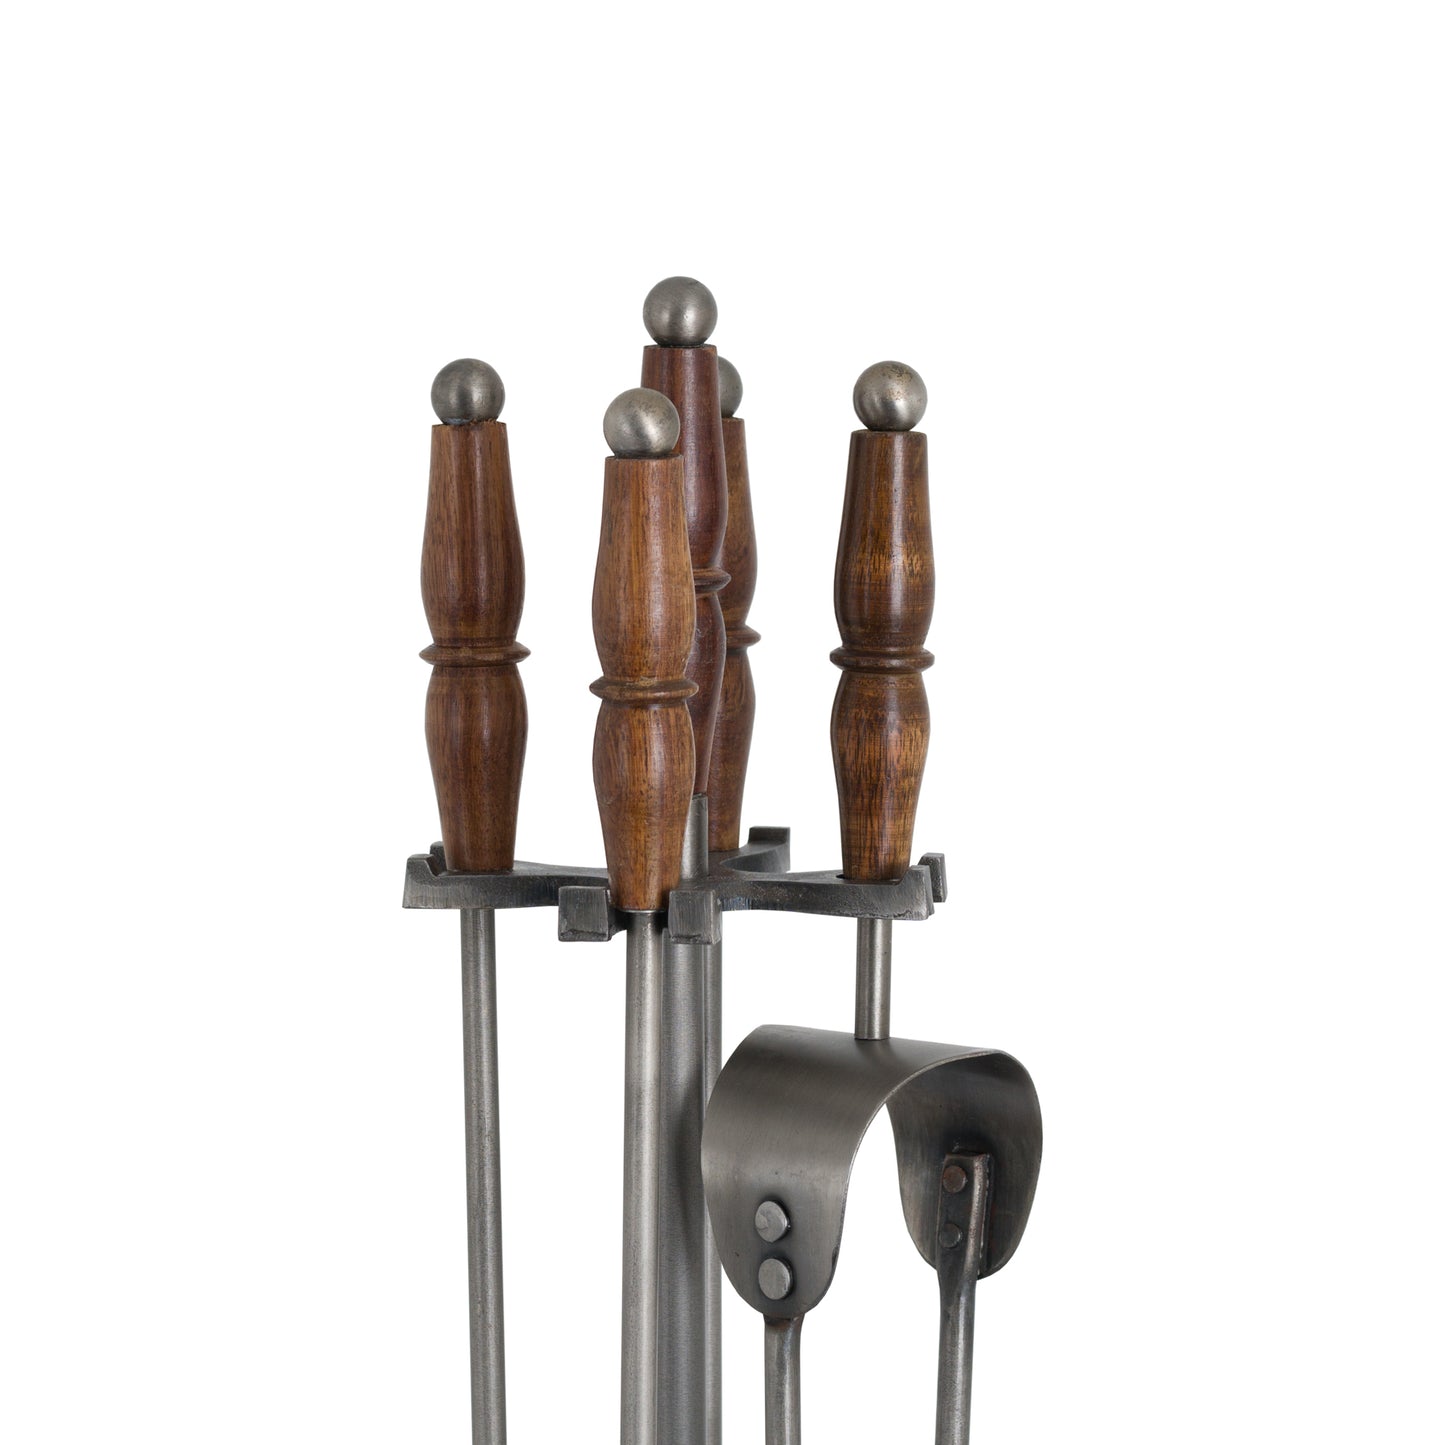 Hand Turned Fire Companion Set In Antique Pewter With Wooden Handles